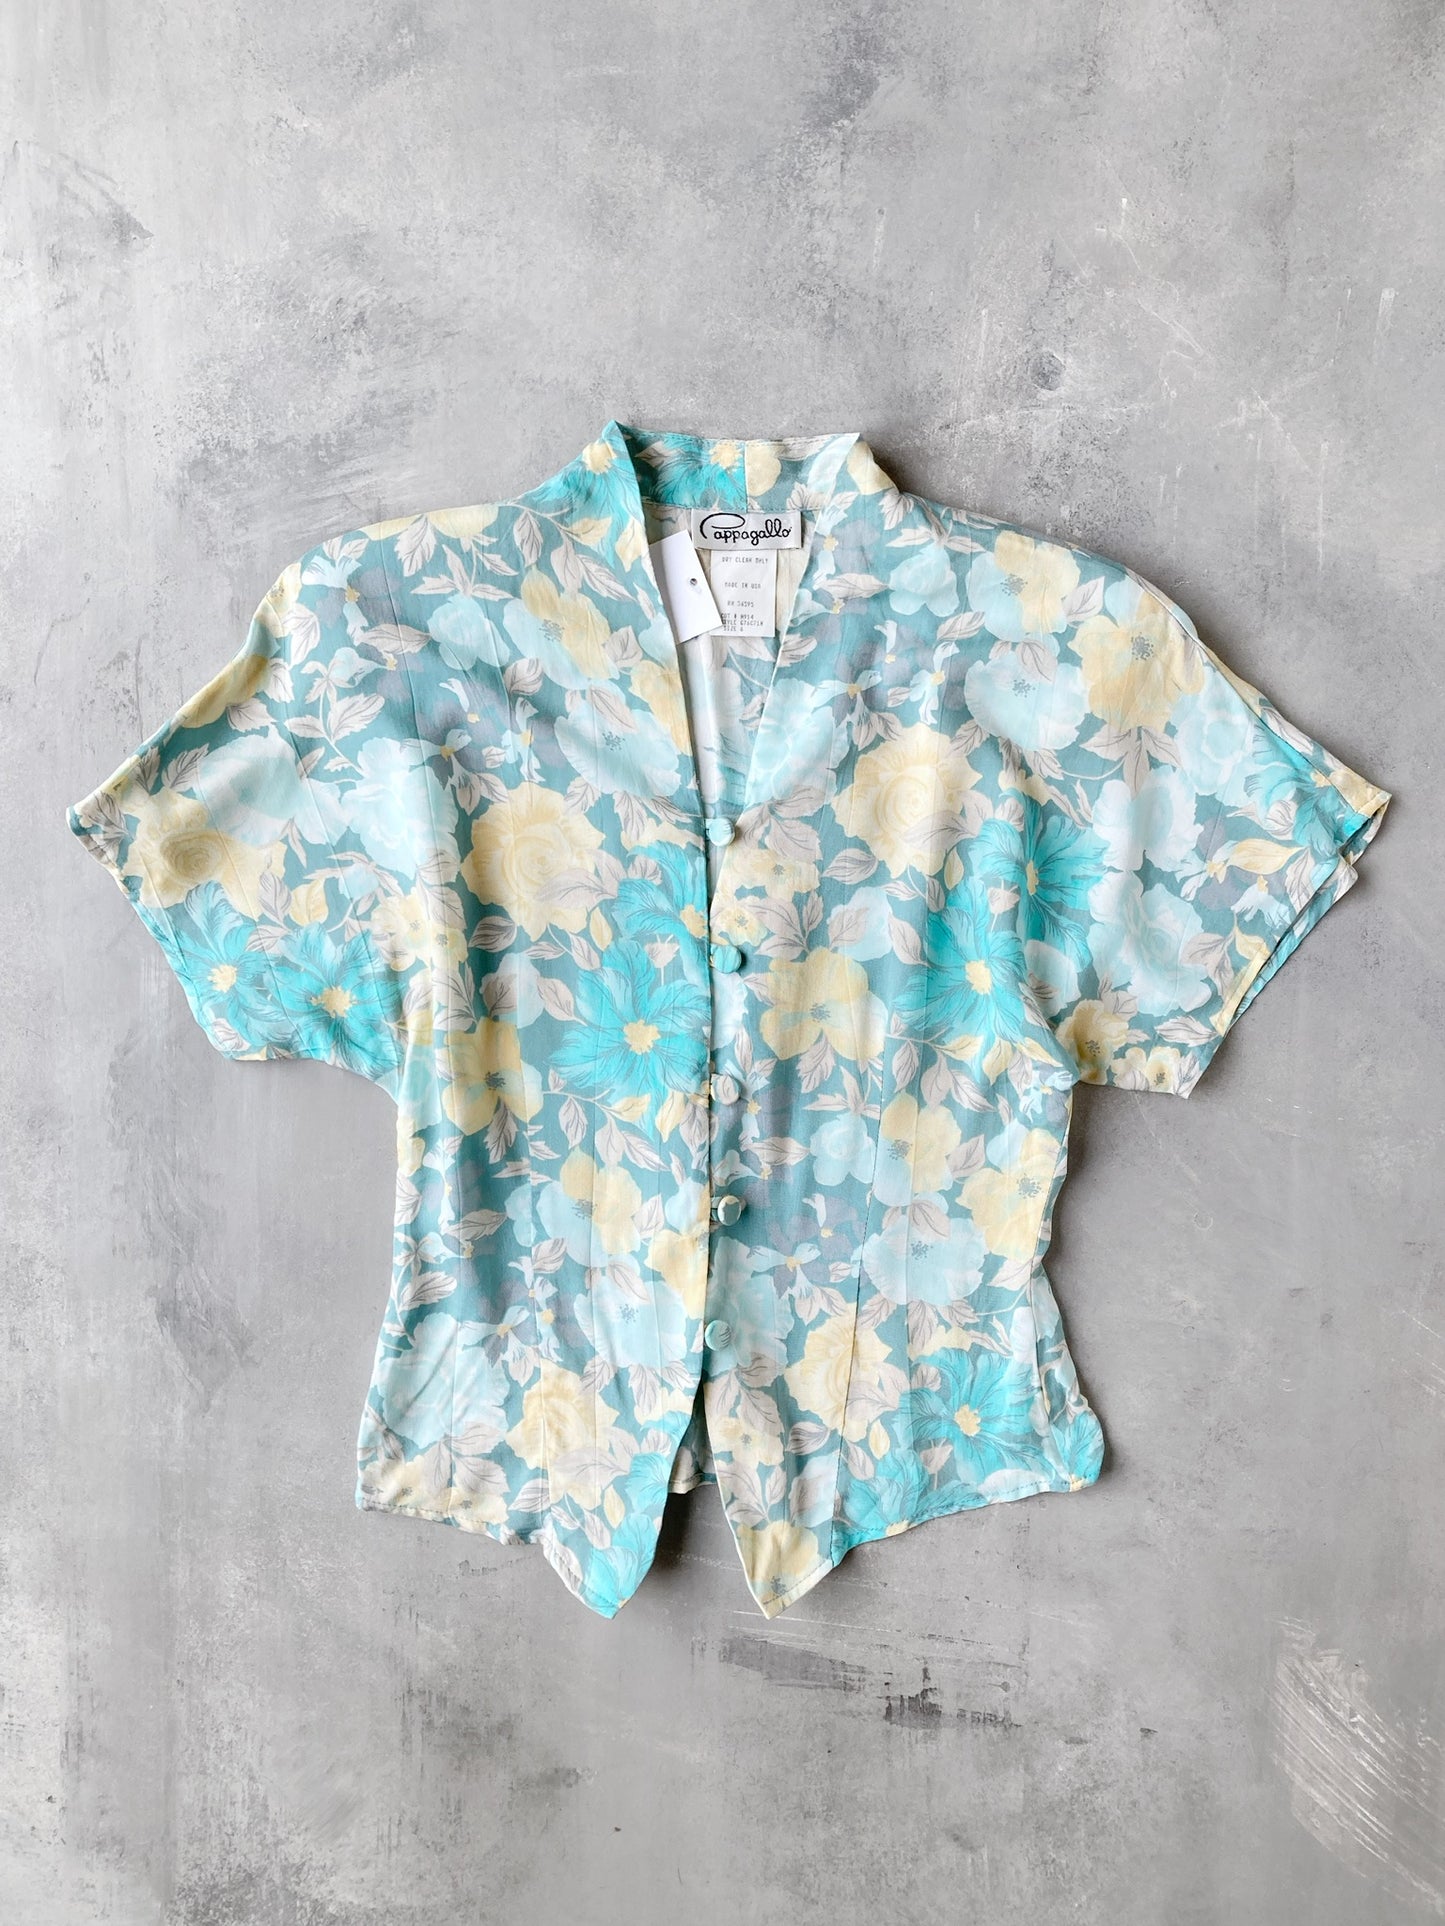 Structured Blue & Yellow Floral Blouse 80's - Small